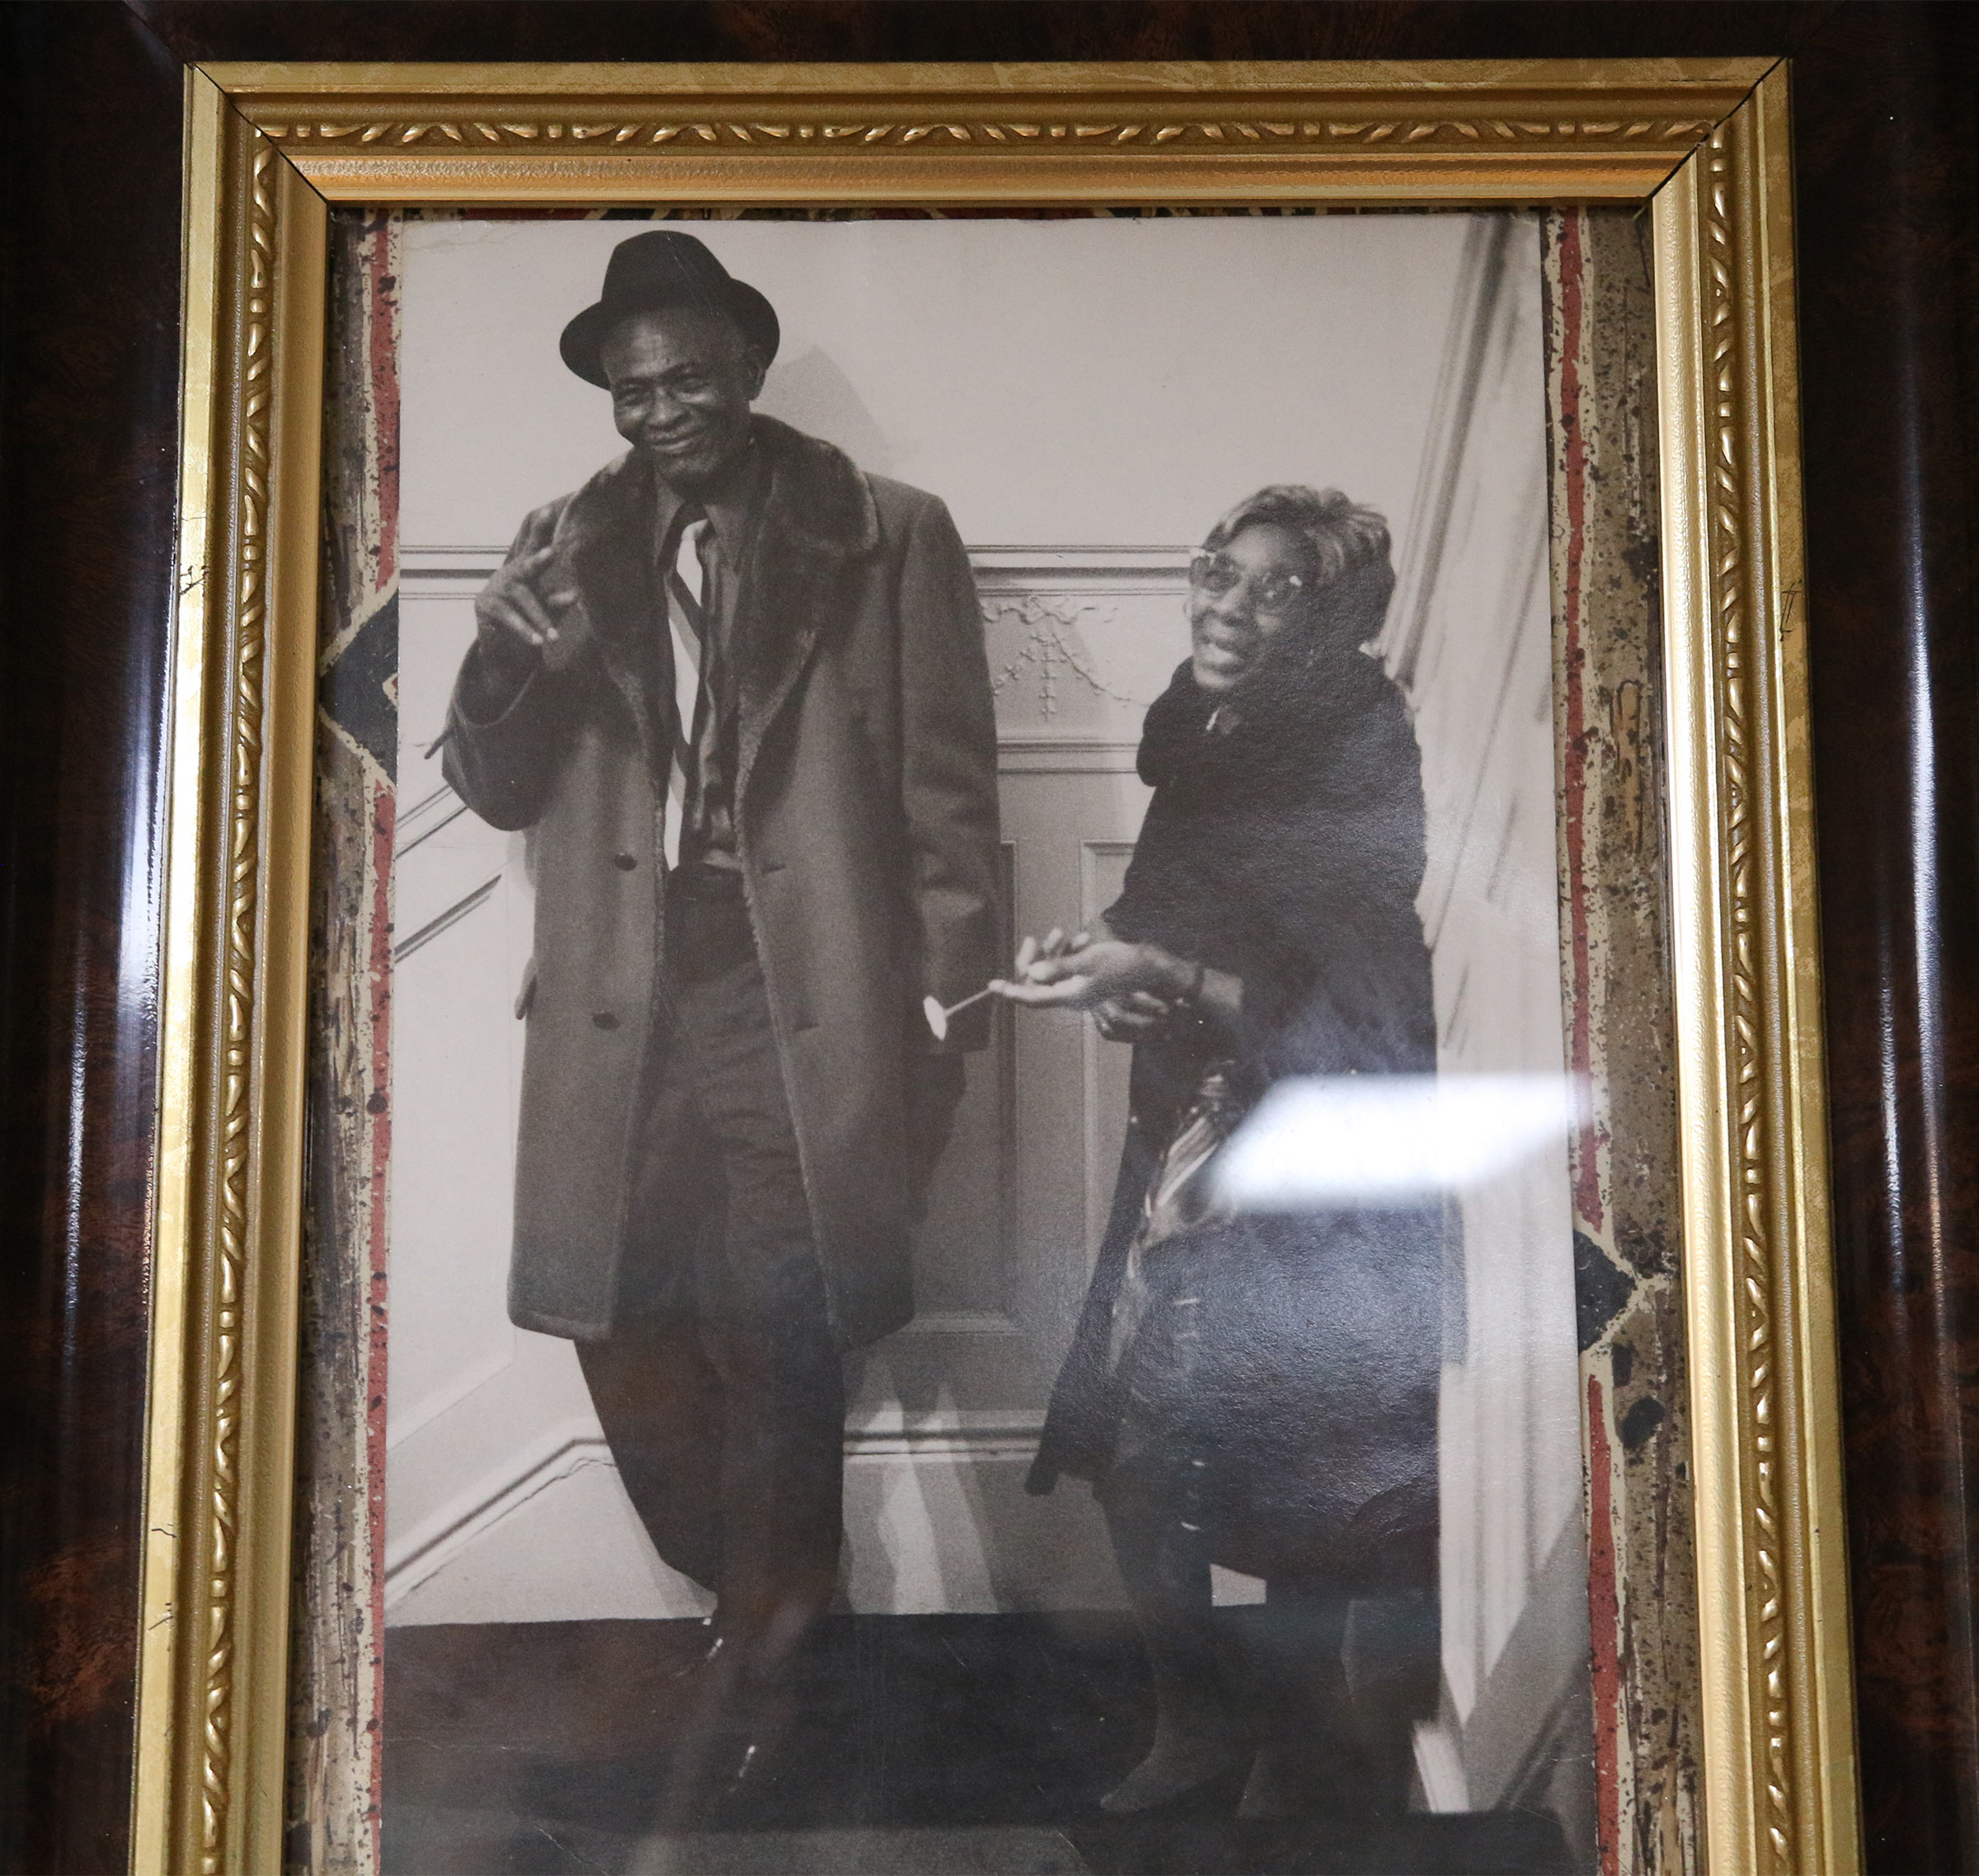 A framed photo of Randy Weston's parents